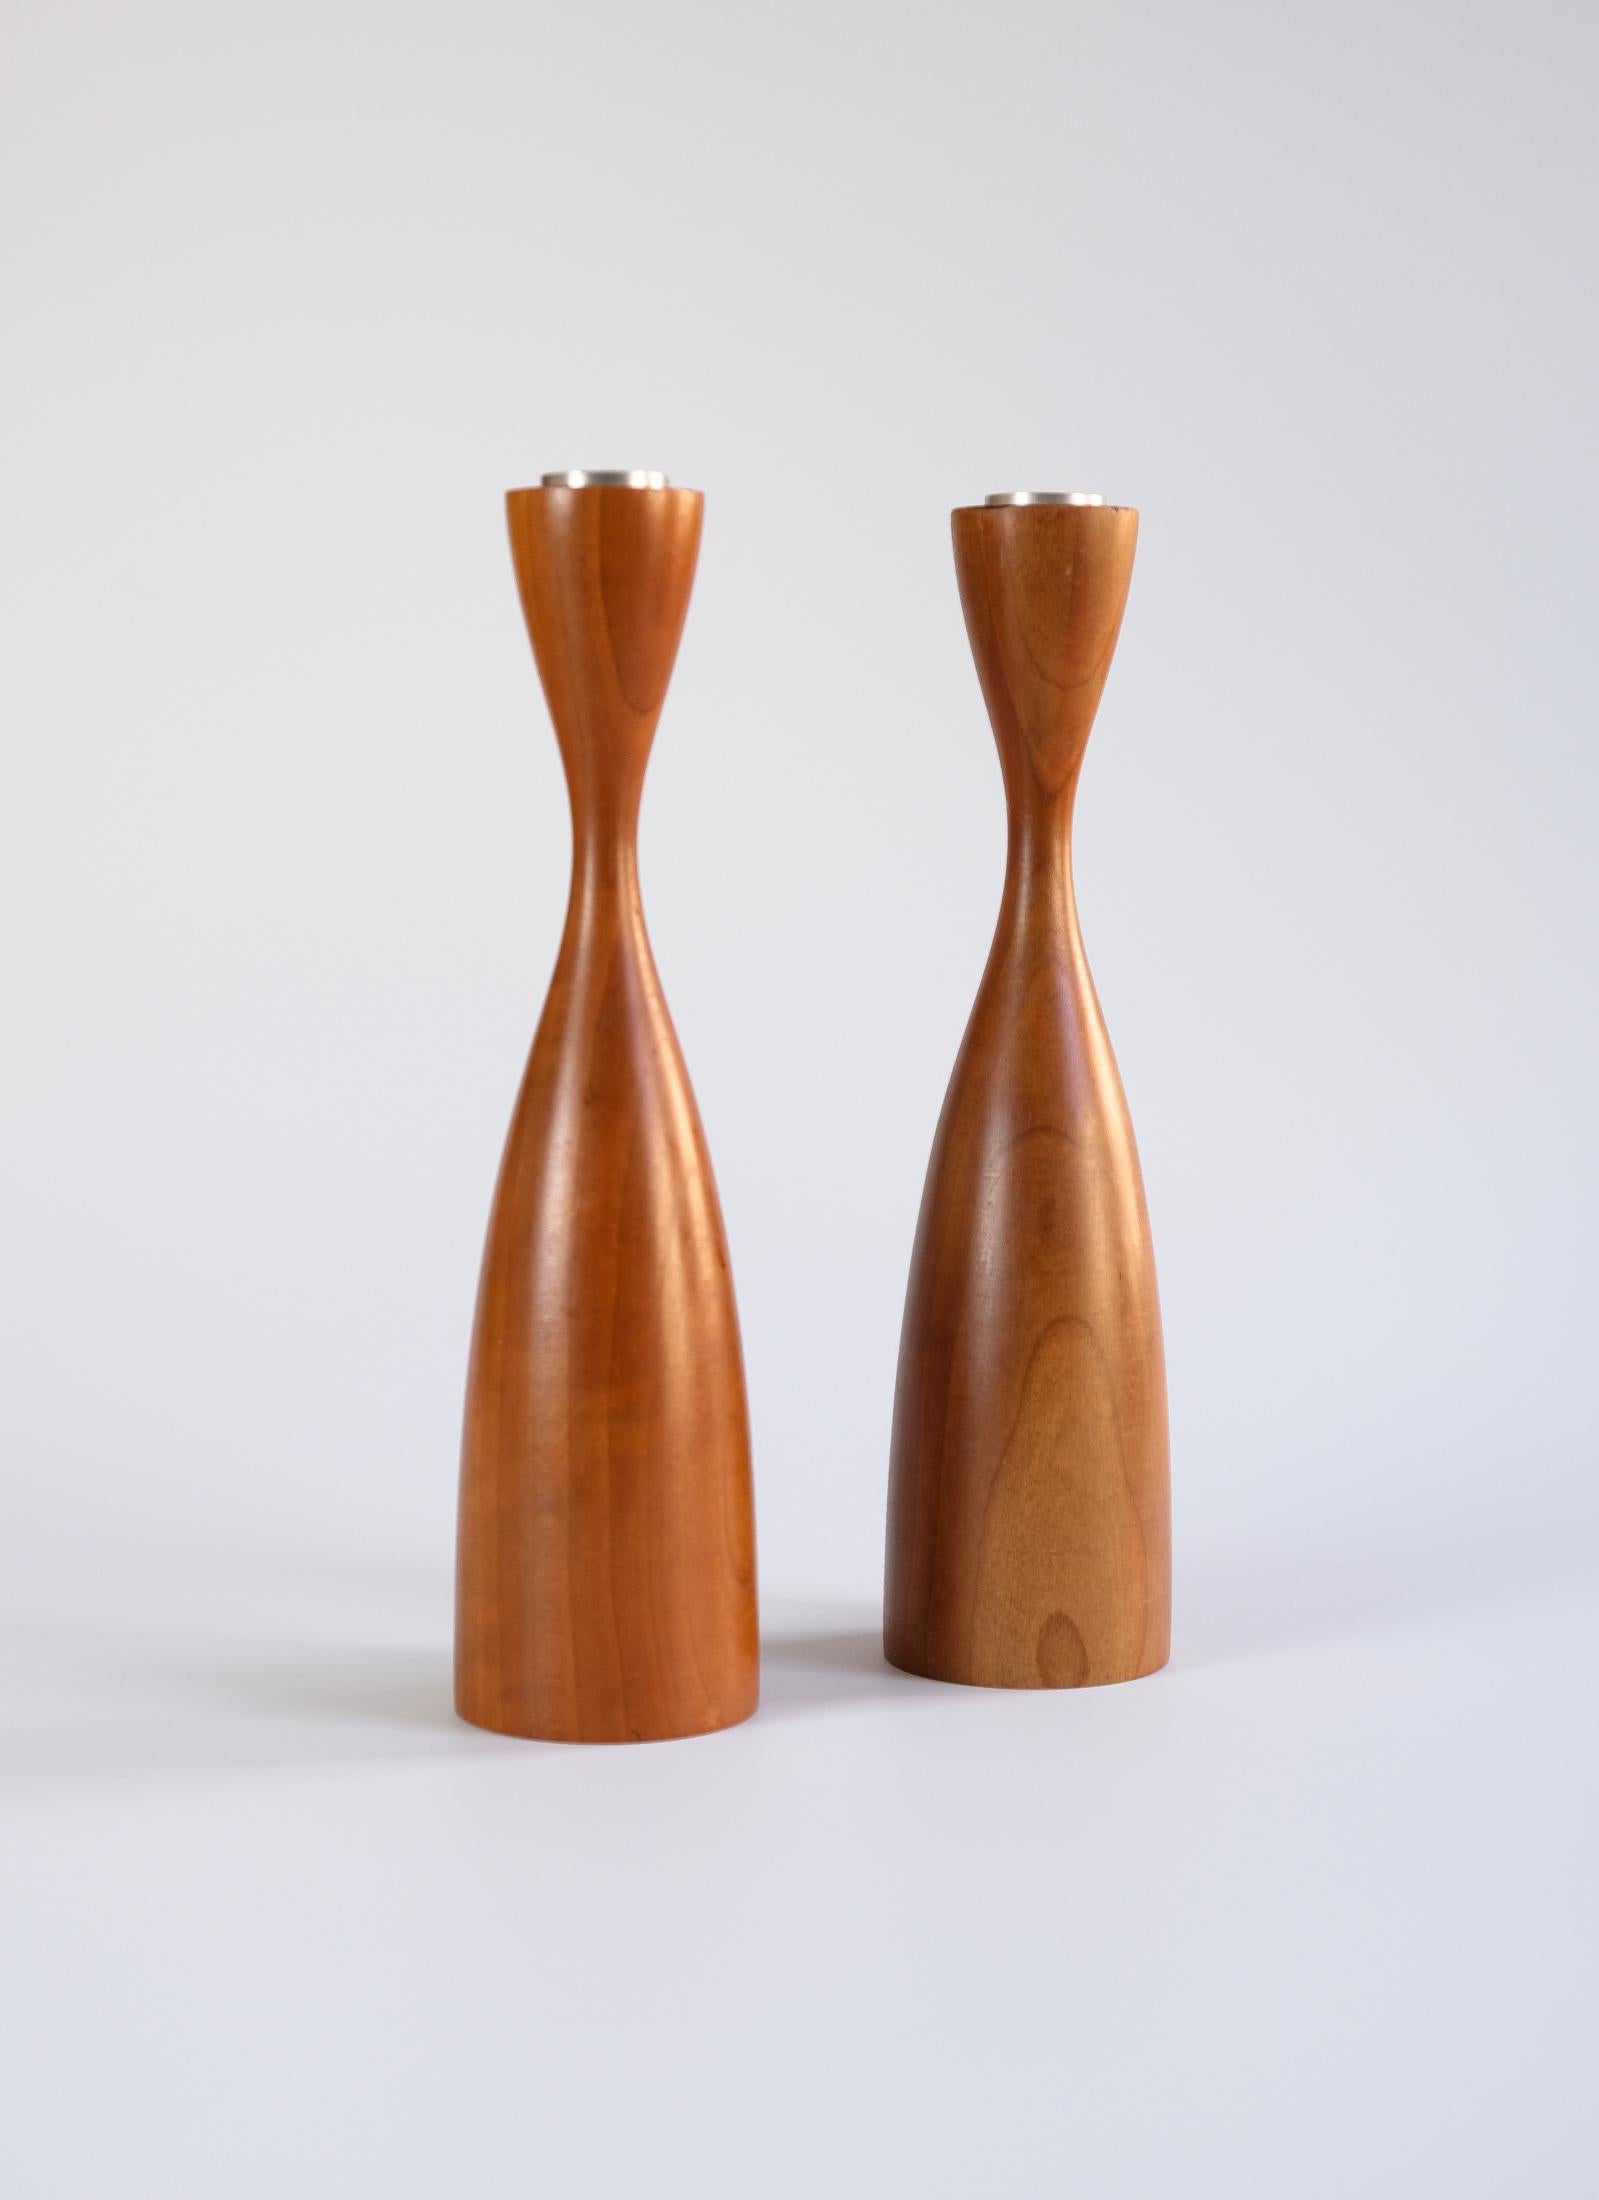 For sale, is an elegant pair of Mid-Century sculptural Danish-style walnut candle holders with aluminium inserts, dating from c.1960s.

In excellent vintage condition, with only minor wear, commensurate with age and careful use. Of note, there are a